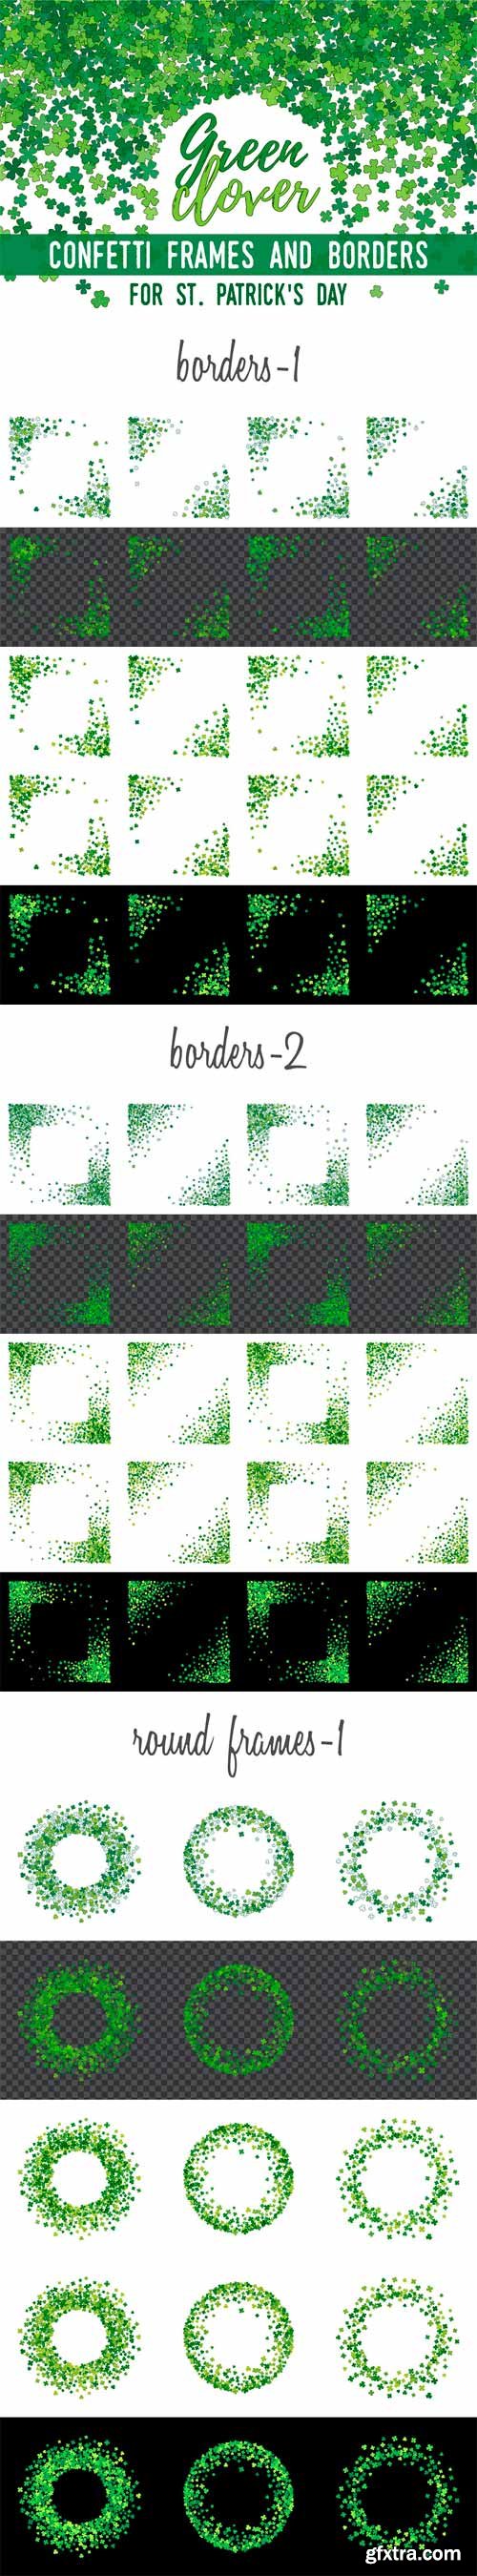 CM 1341824 - Green Clover Frames and Borders